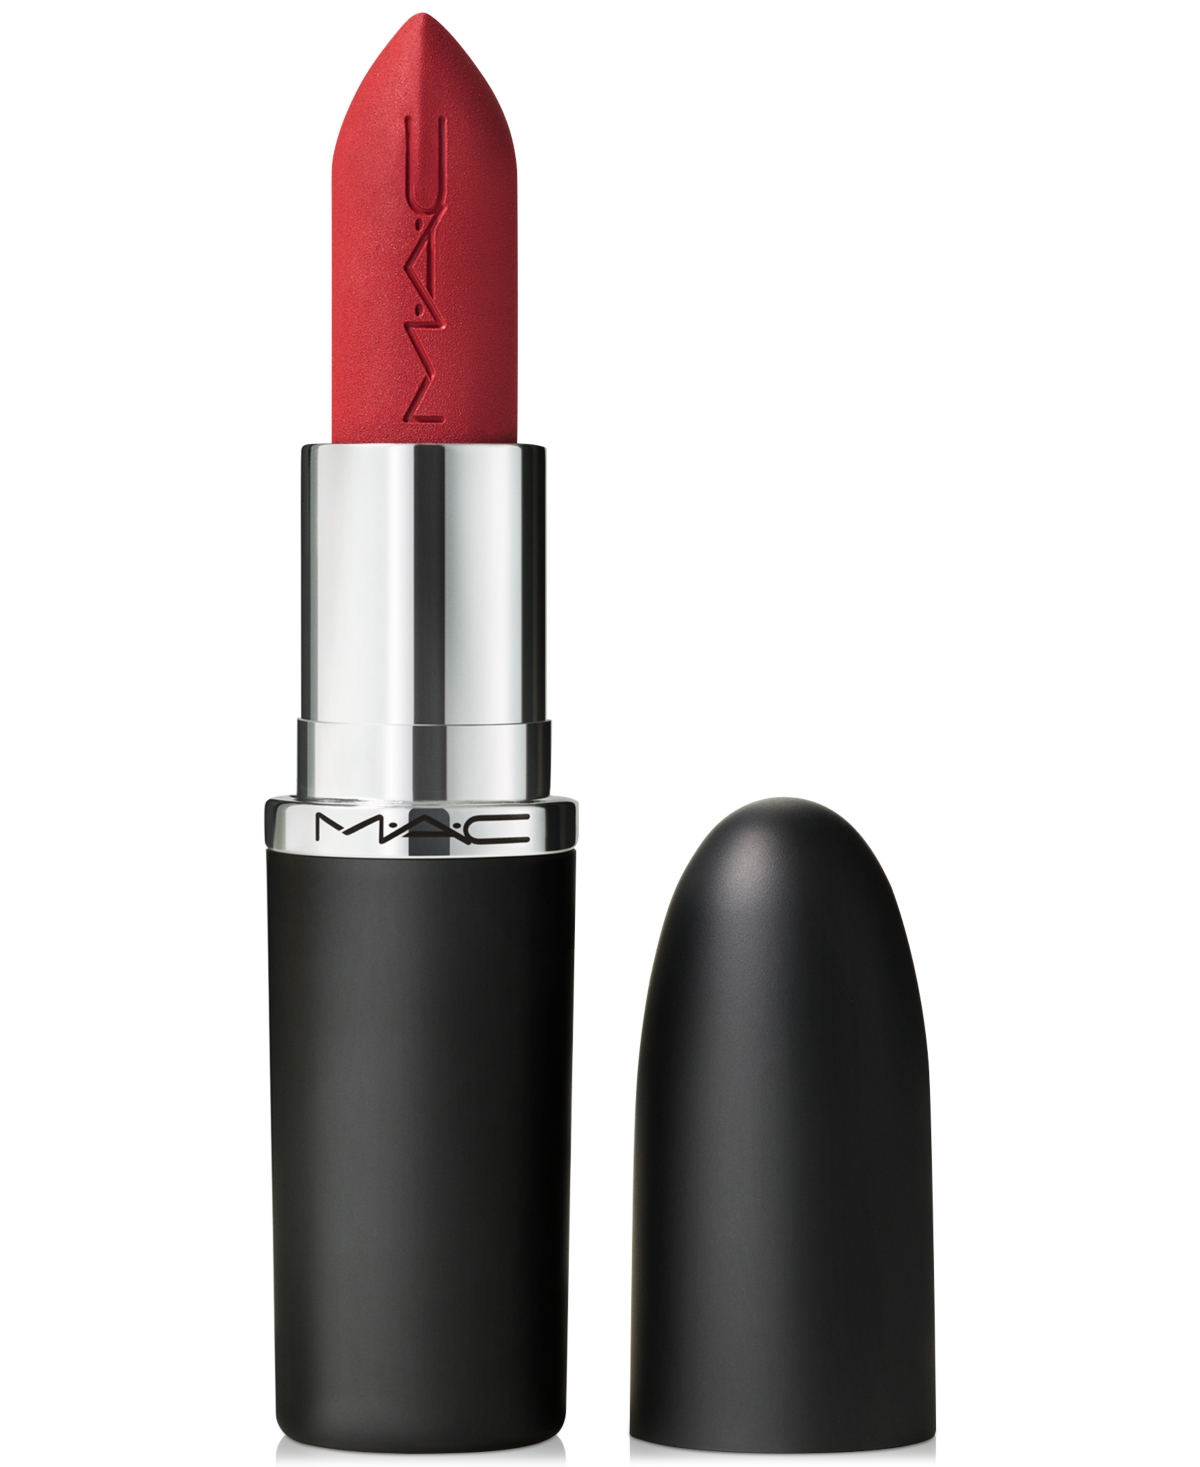 Mac Ximal Silky Matte Lipstick In Forever Curious